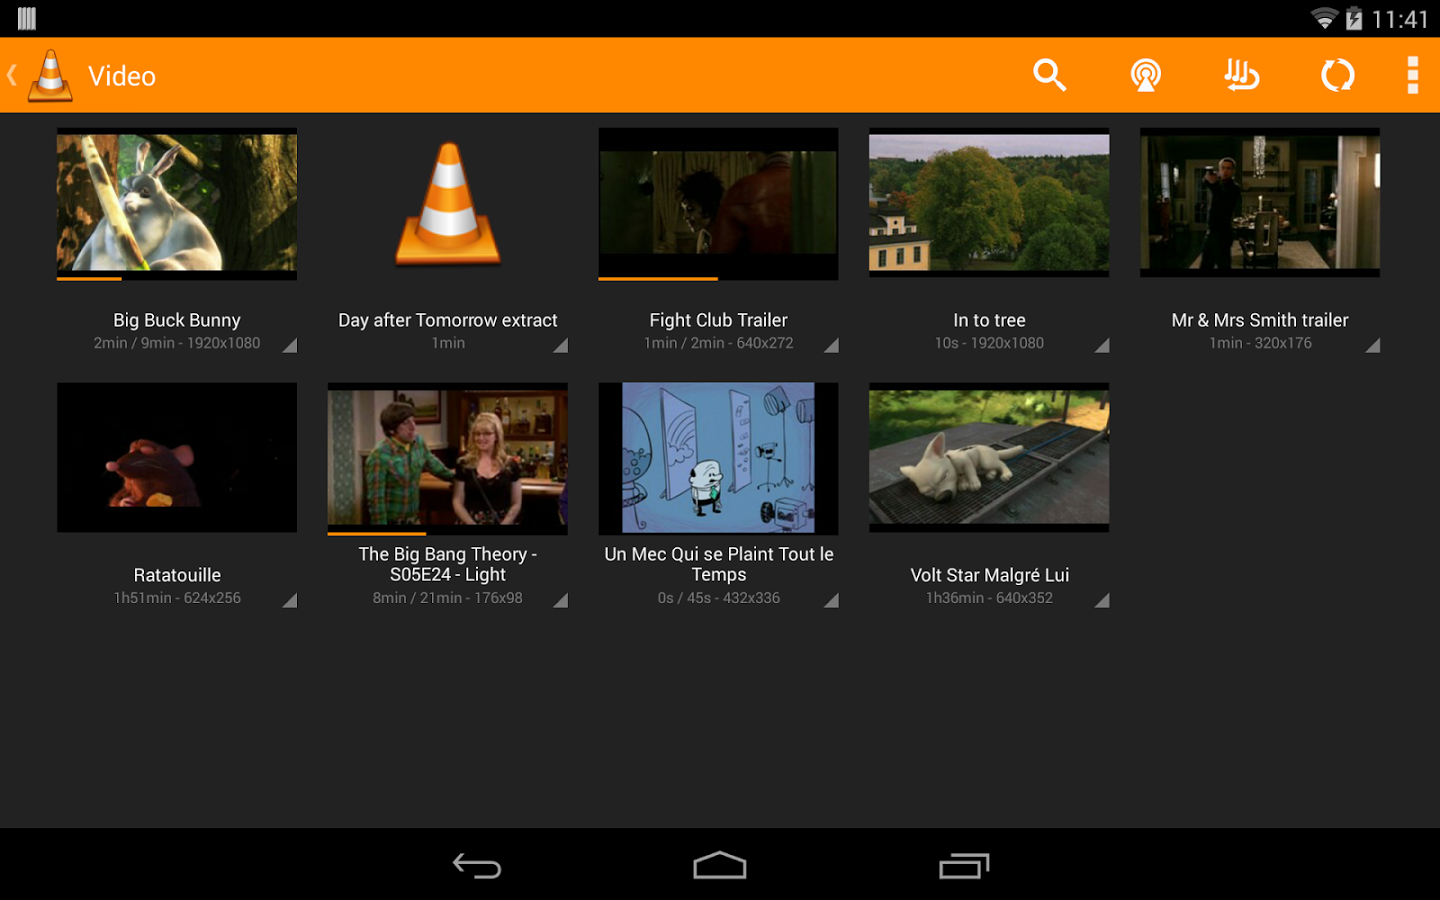 vlc download youtube video